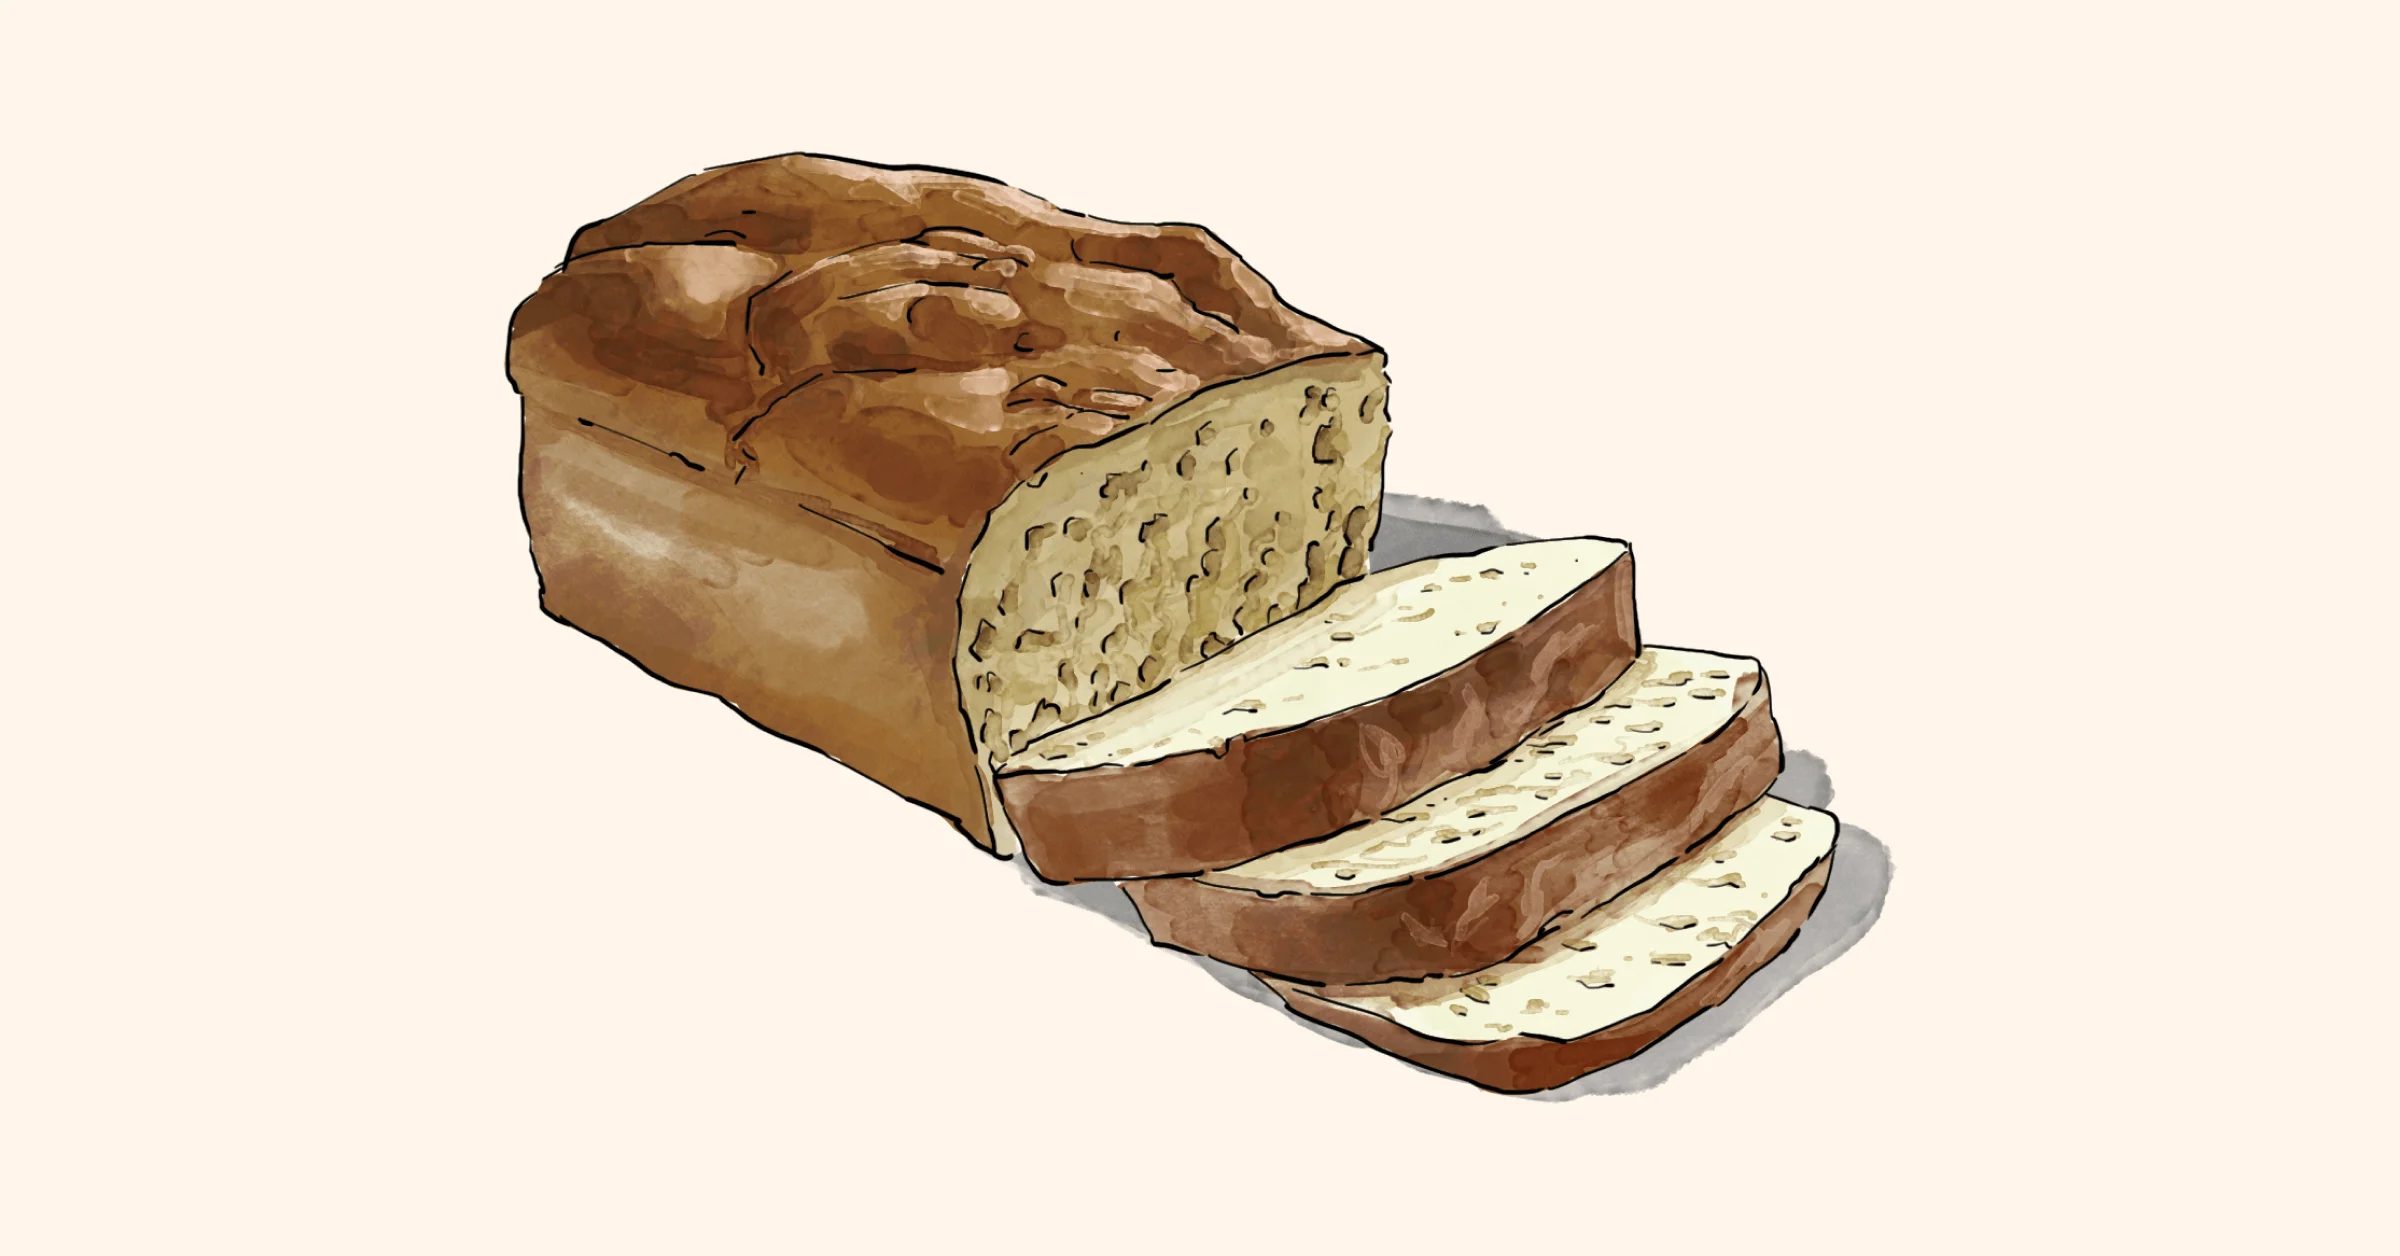 Illustration of Uncle Lynn’s English Muffin Bread